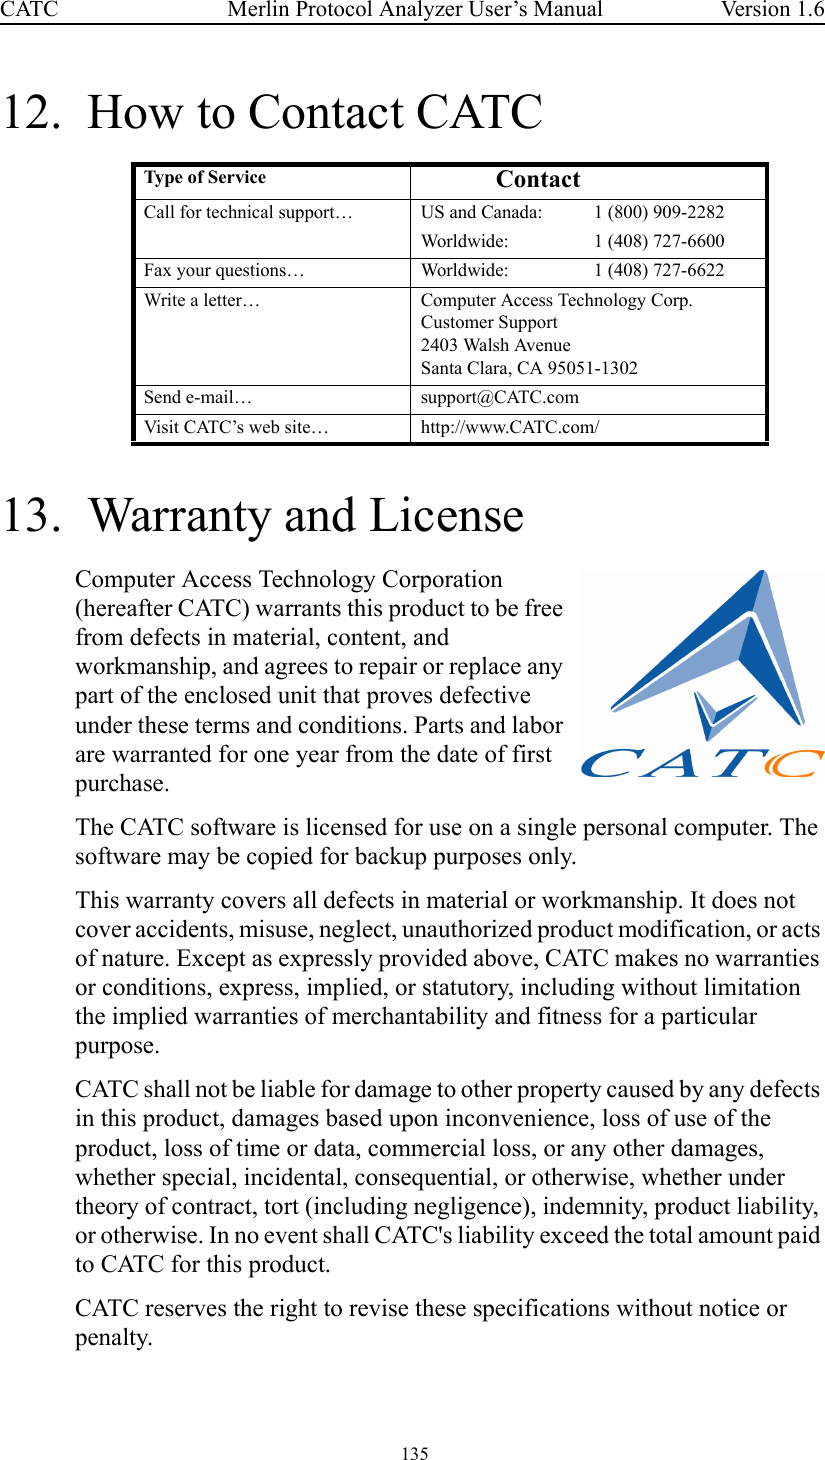  135 Merlin Protocol Analyzer User’s ManualCATC Version 1.612.  How to Contact CATC13.  Warranty and LicenseComputer Access Technology Corporation (hereafter CATC) warrants this product to be free from defects in material, content, and workmanship, and agrees to repair or replace any part of the enclosed unit that proves defective under these terms and conditions. Parts and labor are warranted for one year from the date of first purchase.The CATC software is licensed for use on a single personal computer. The software may be copied for backup purposes only.This warranty covers all defects in material or workmanship. It does not cover accidents, misuse, neglect, unauthorized product modification, or acts of nature. Except as expressly provided above, CATC makes no warranties or conditions, express, implied, or statutory, including without limitation the implied warranties of merchantability and fitness for a particular purpose.CATC shall not be liable for damage to other property caused by any defects in this product, damages based upon inconvenience, loss of use of the product, loss of time or data, commercial loss, or any other damages, whether special, incidental, consequential, or otherwise, whether under theory of contract, tort (including negligence), indemnity, product liability, or otherwise. In no event shall CATC&apos;s liability exceed the total amount paid to CATC for this product.CATC reserves the right to revise these specifications without notice or penalty.Type  of Service ContactCall for technical support… US and Canada: 1 (800) 909-2282Worldwide: 1 (408) 727-6600Fax your questions… Worldwide: 1 (408) 727-6622Write a letter… Computer Access Technology Corp.Customer Support2403 Walsh AvenueSanta Clara, CA 95051-1302Send e-mail… support@CATC.comVisit CATC’s web site… http://www.CATC.com/